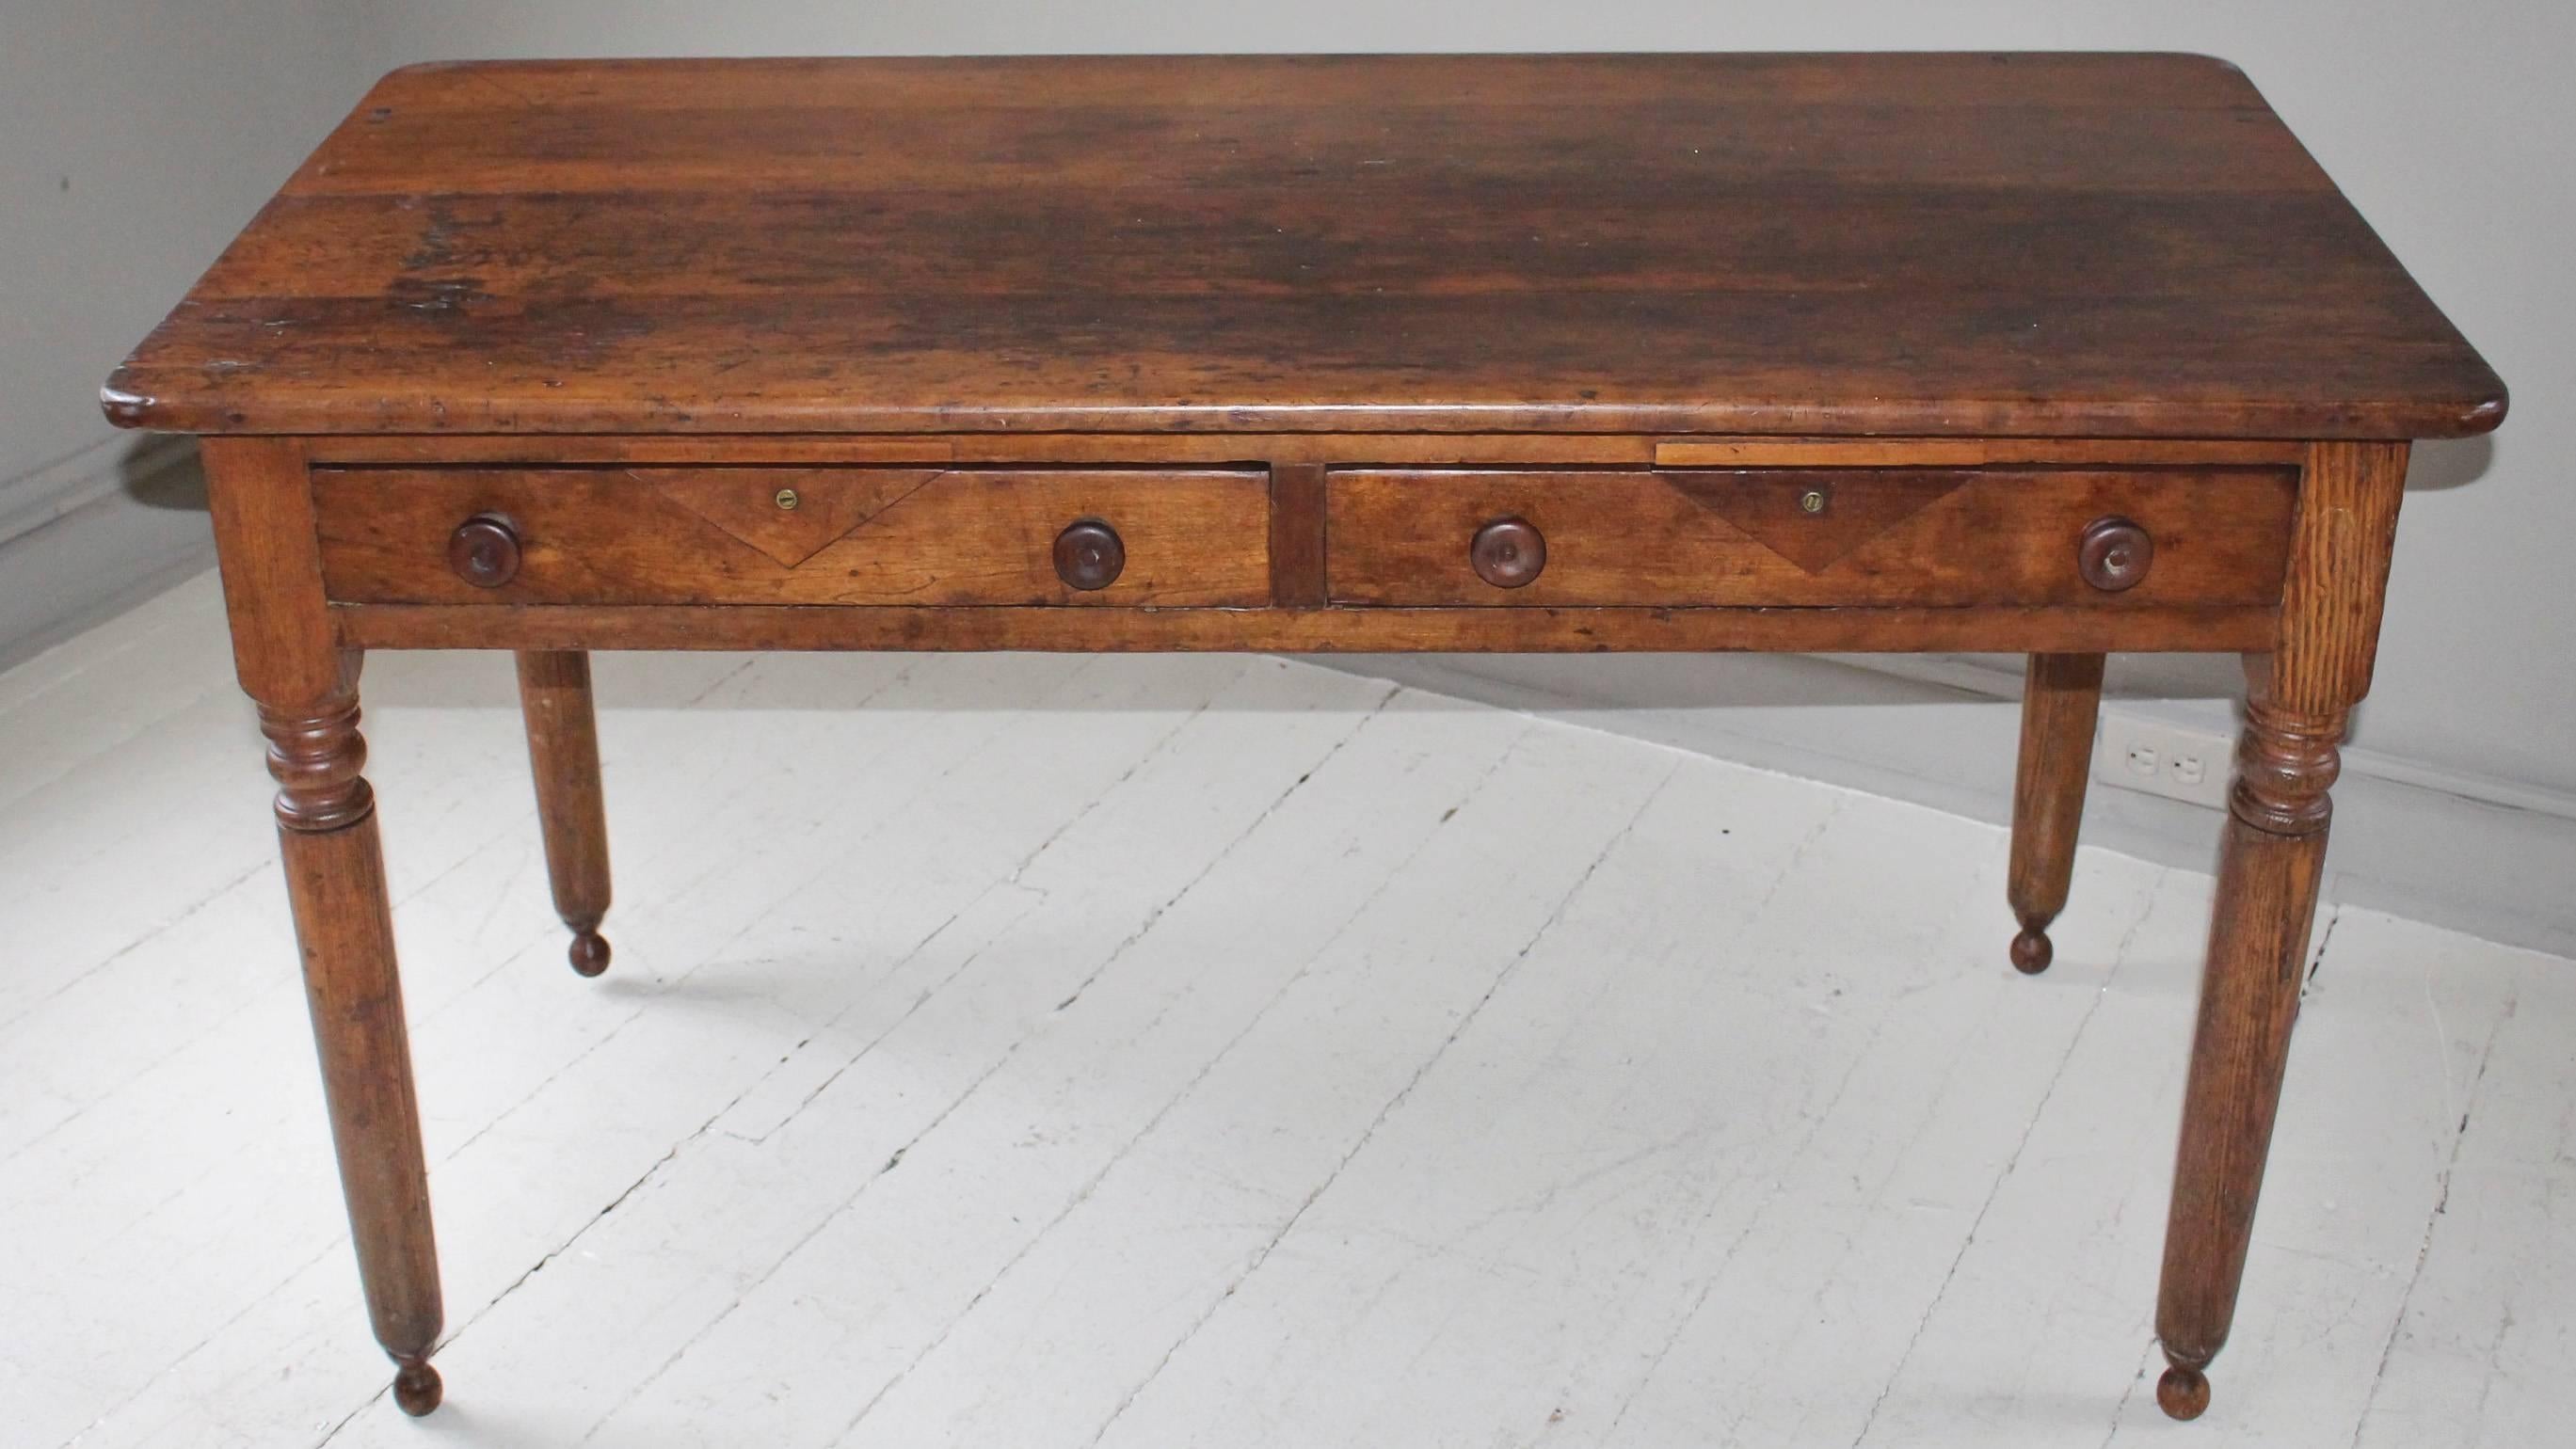 Two-drawer oak table, 19th England, with turned legs ending 'On Pointe'.